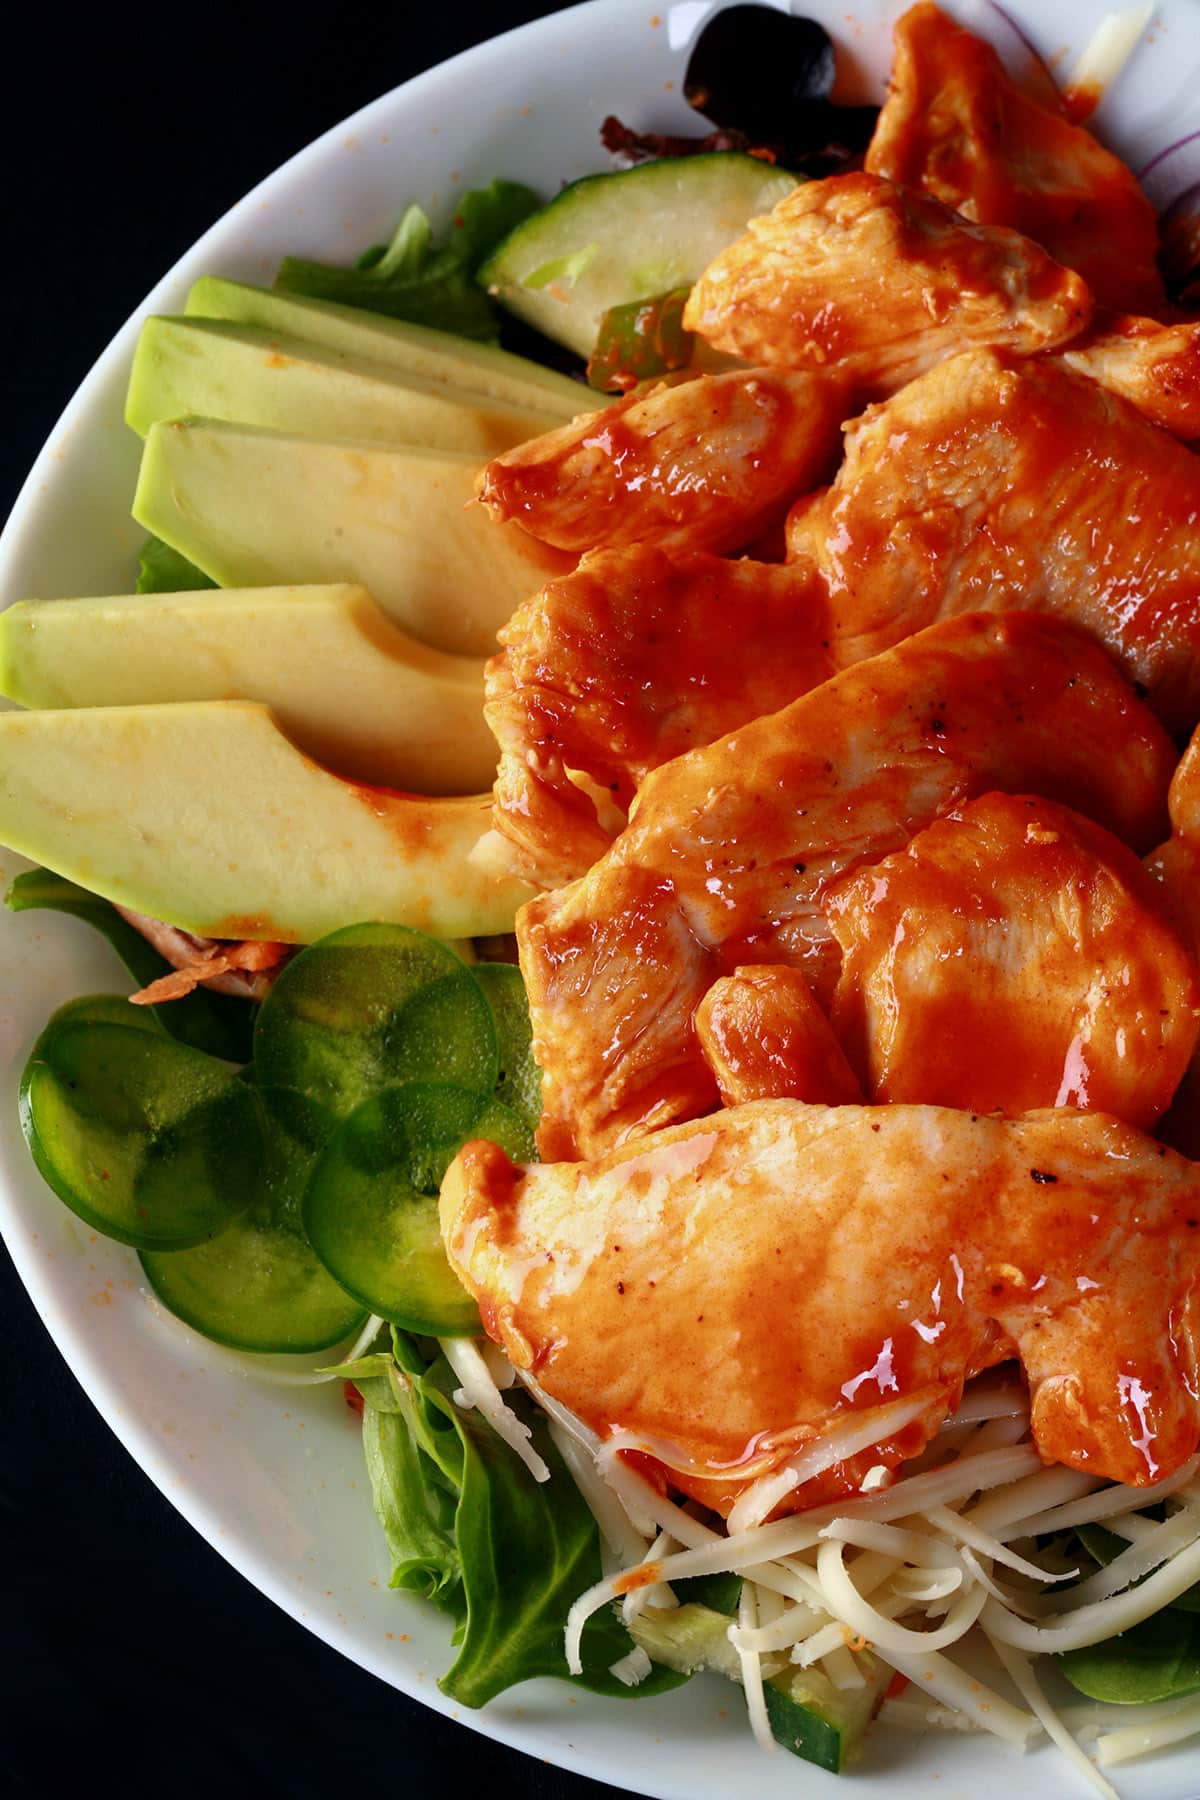 A buffalo chicken salad with buffalo glazed chicken breast on top.